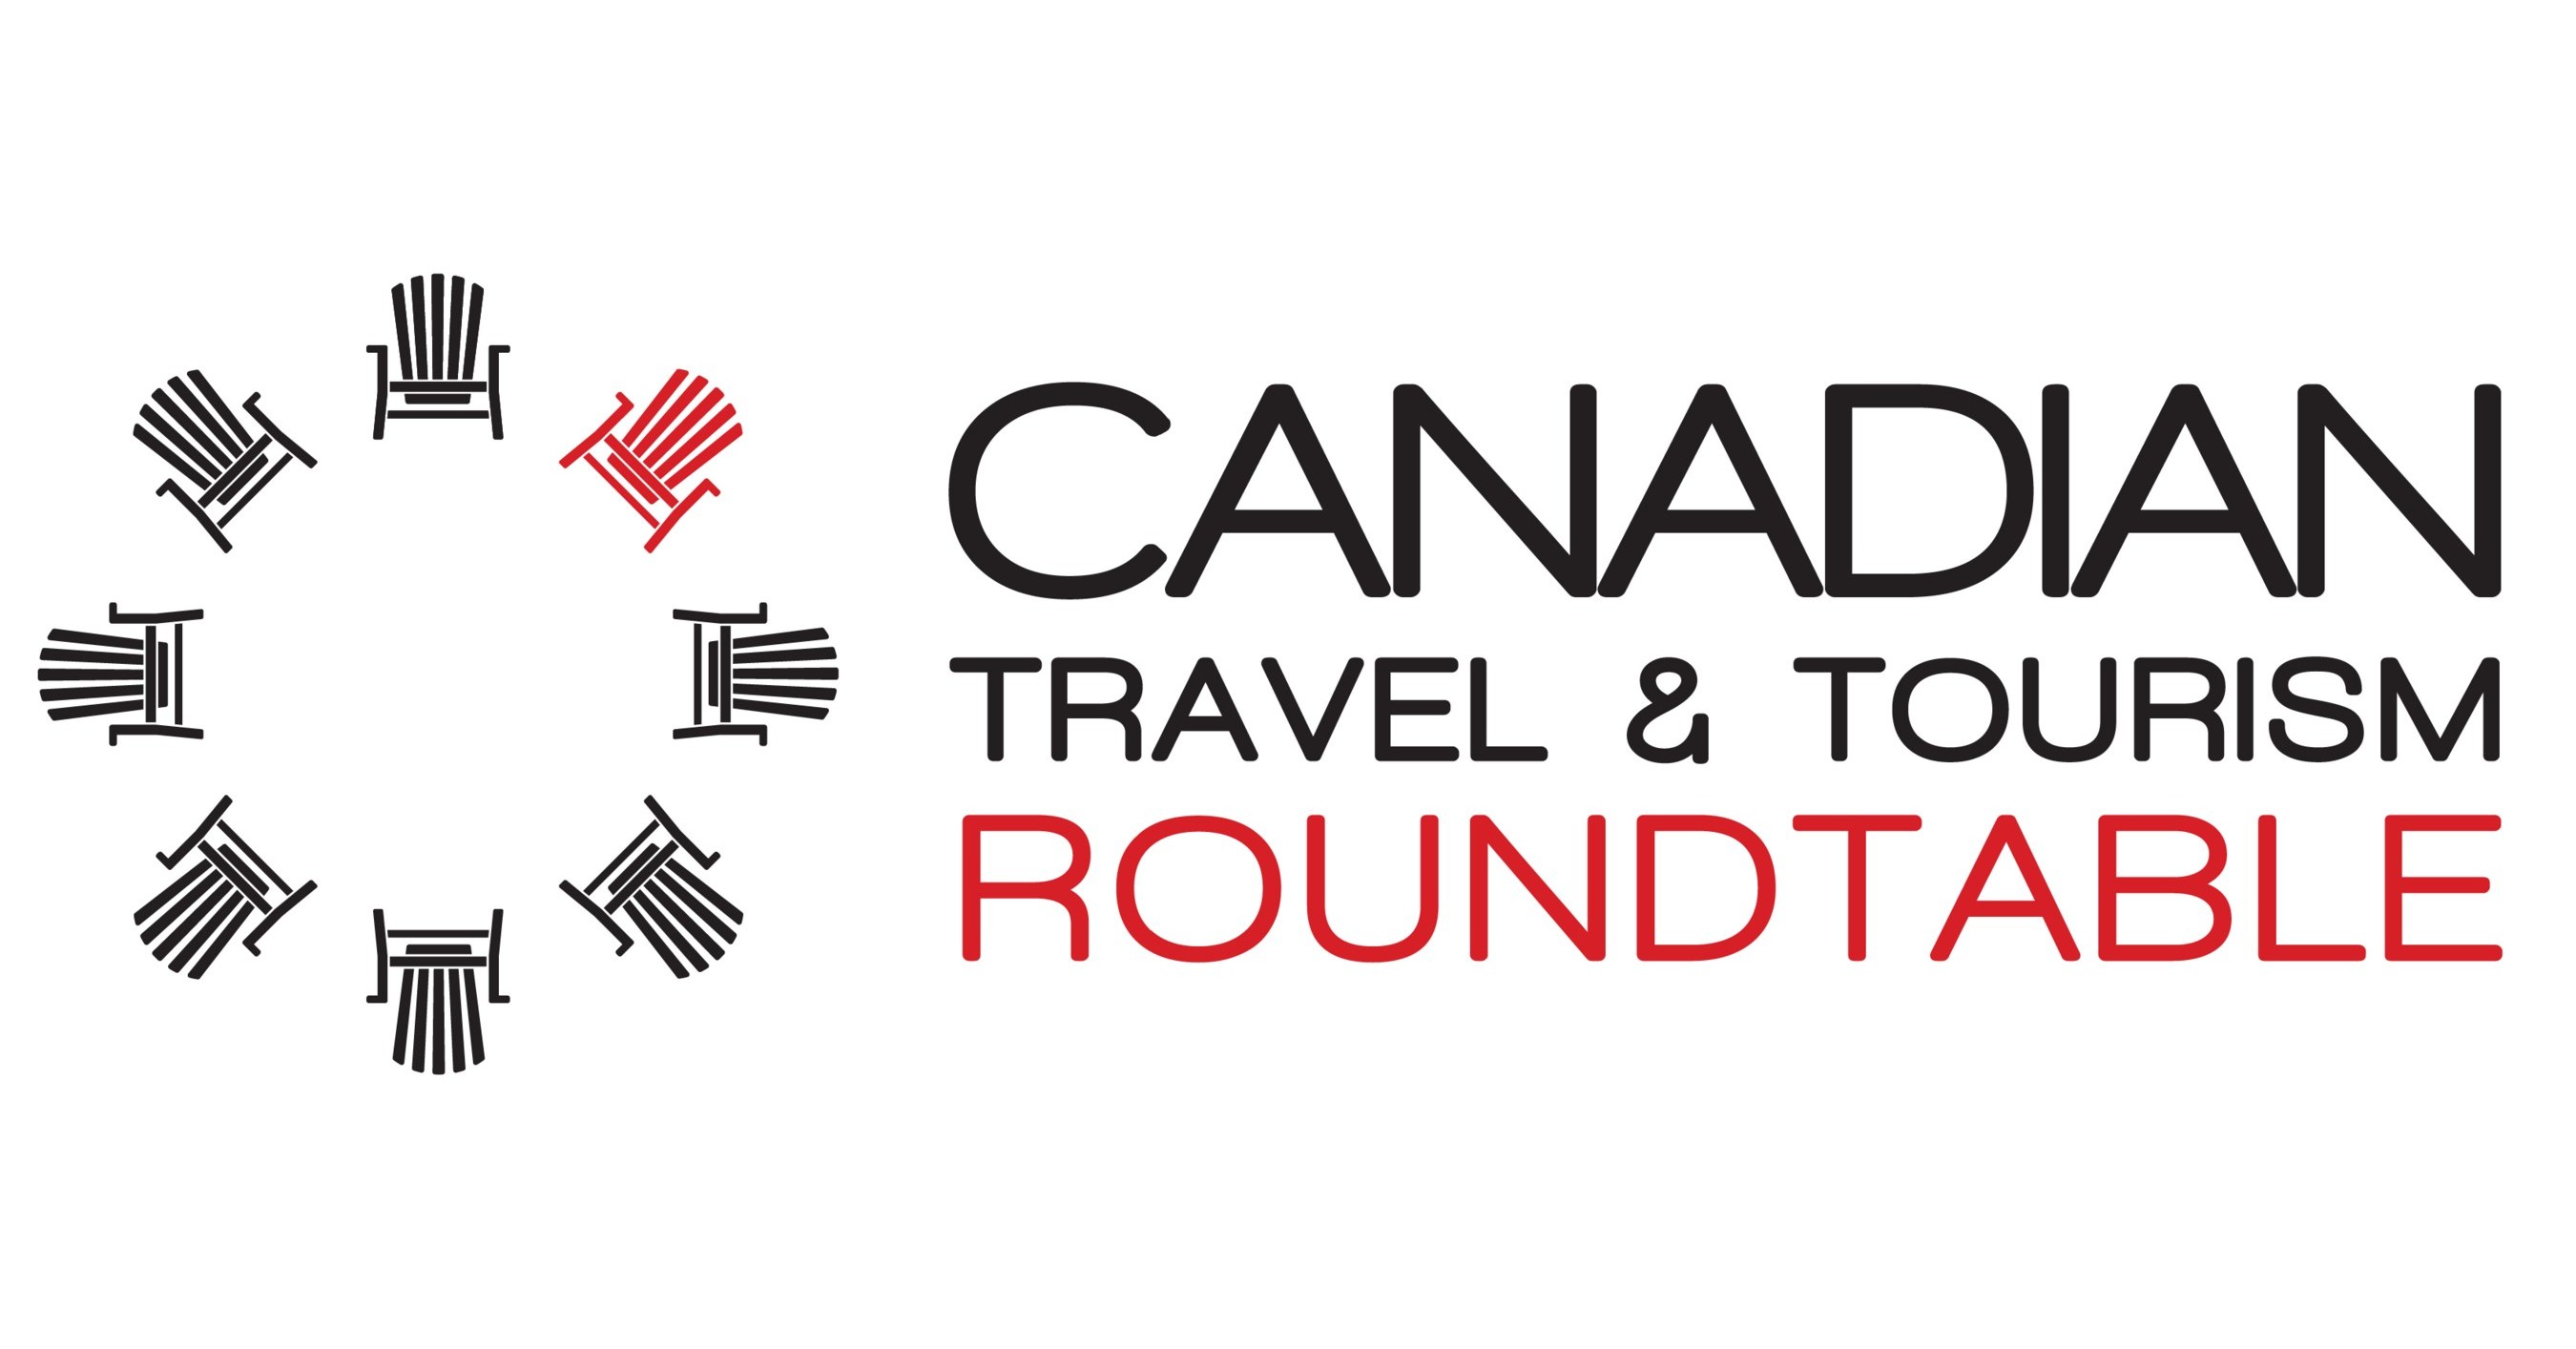 ministry of tourism canada